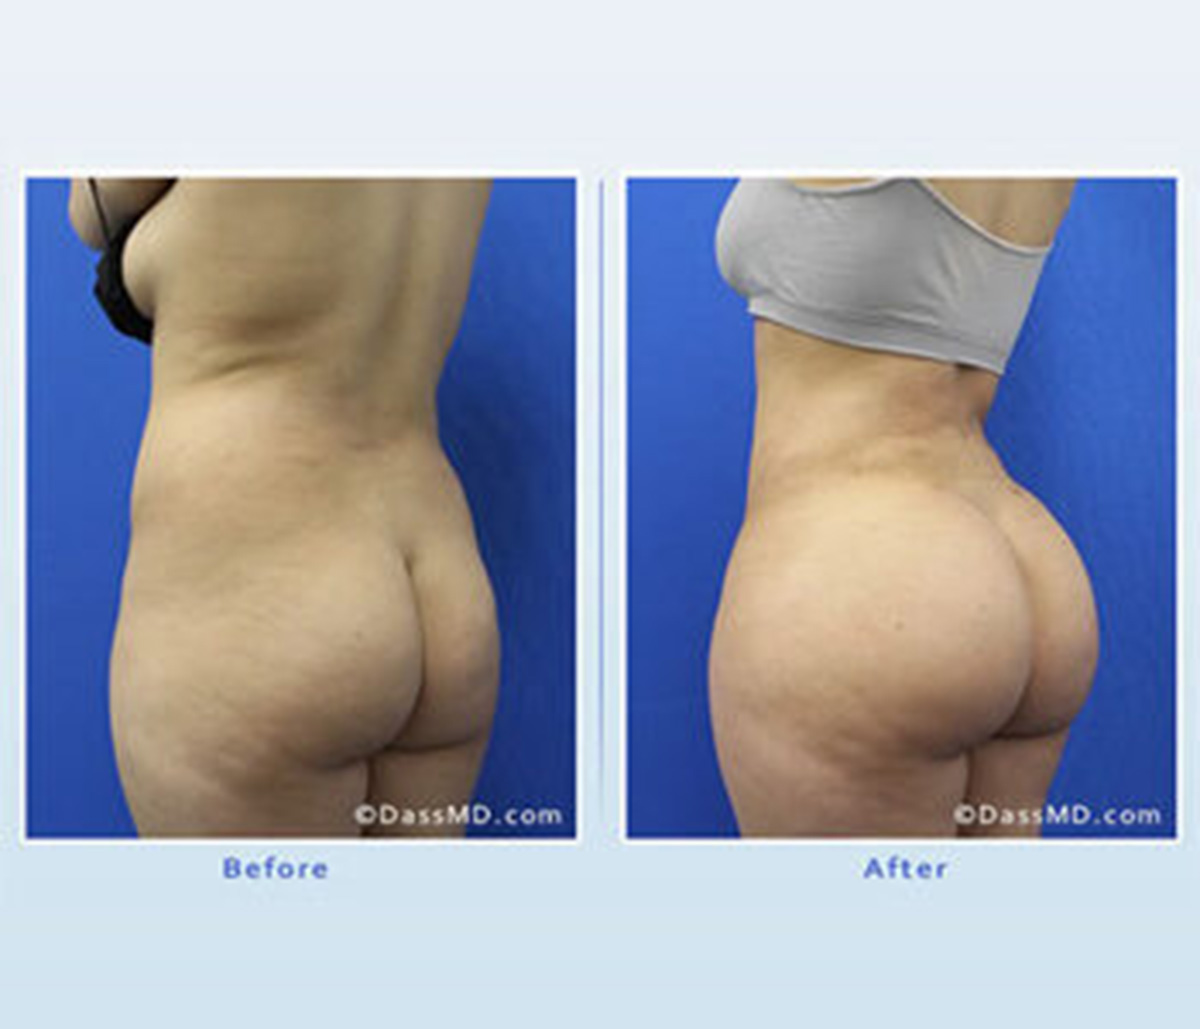 The Famous Butt Lift - Visage Cosmetic Plastic Surgery